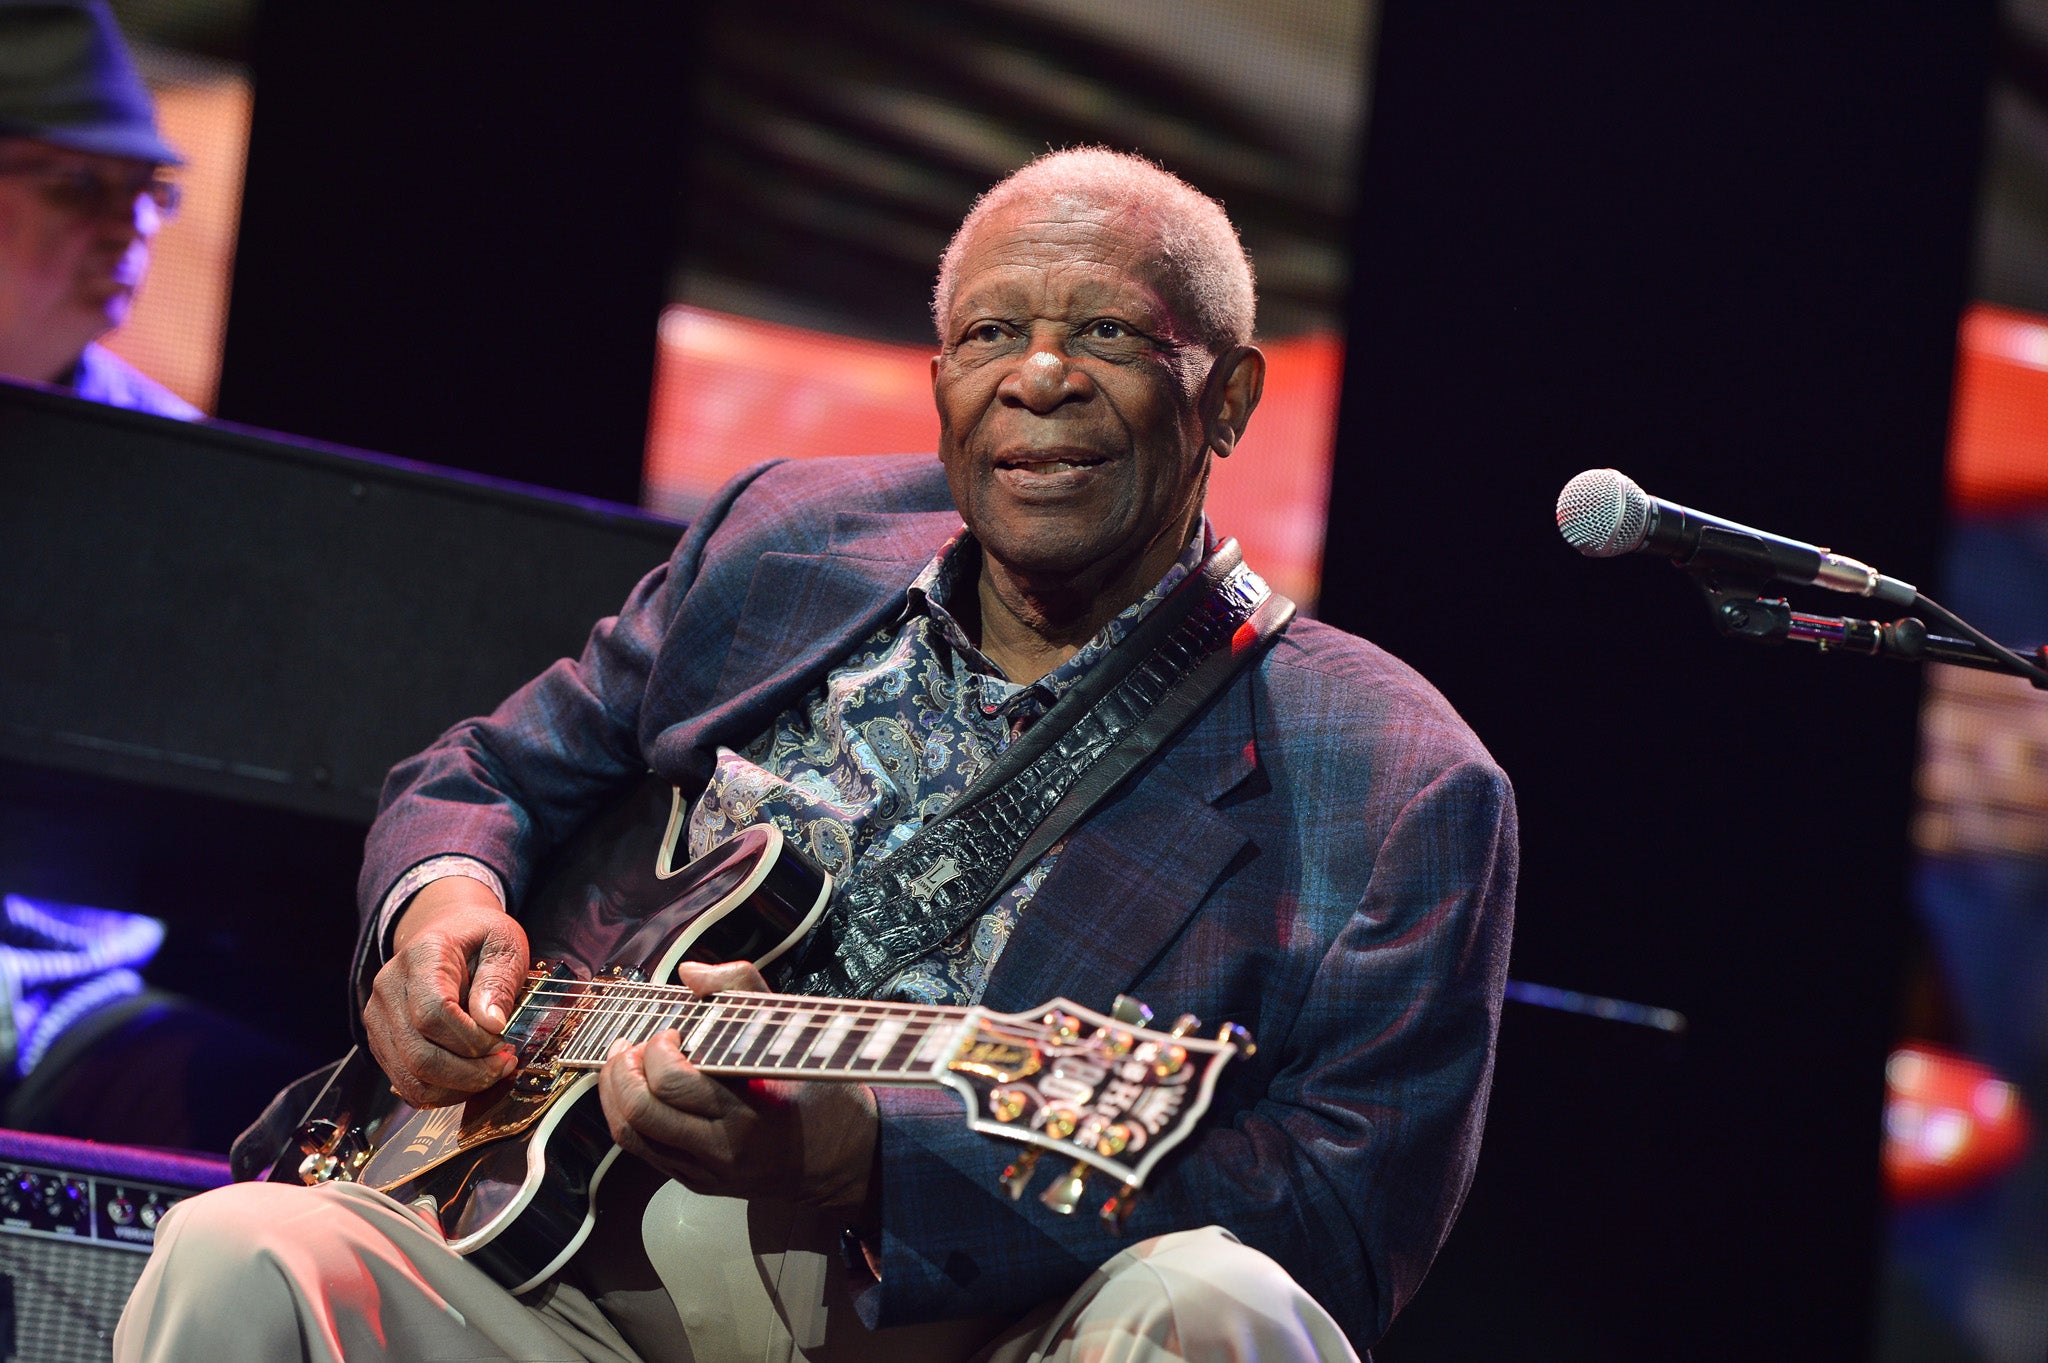 BB King performs on stage in 2013. The blues legend is currently undergoing hospice care at his home